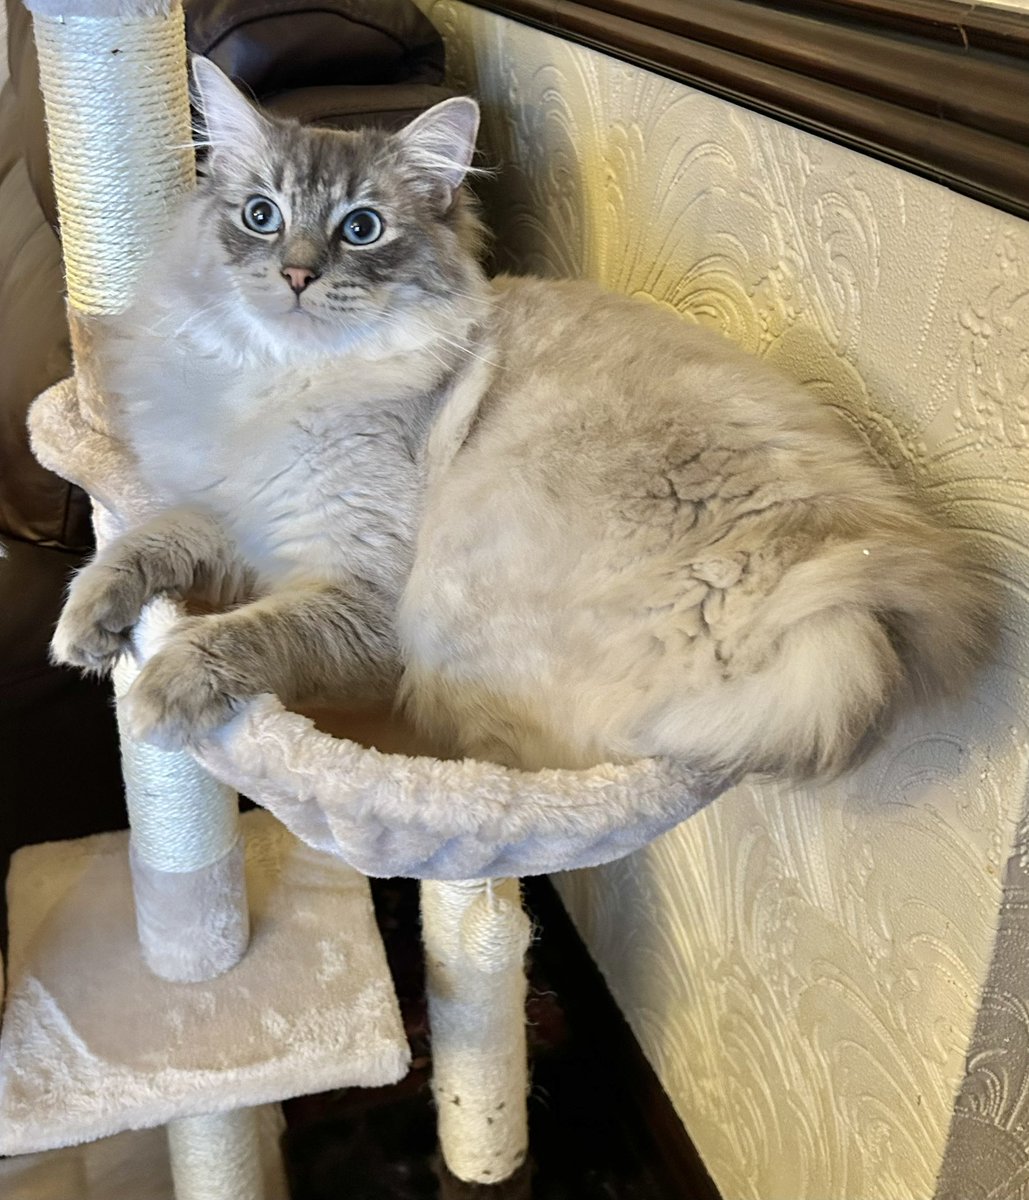 @MissyBBBobtail @kerrylalameow @RosieDicken @PaulKayRadio Meowy Moggytastic Wednesday feline furriends😺🐾from purrfectly cute pawsomely fluffy adorably lovely Leo Cat😻🐾enjoying playing on his fun new Cat Tree😹🐾Cooler cloudy very rainy Shropshire, England😽🐾#LynxRagDollCat #CatsOfTwitter